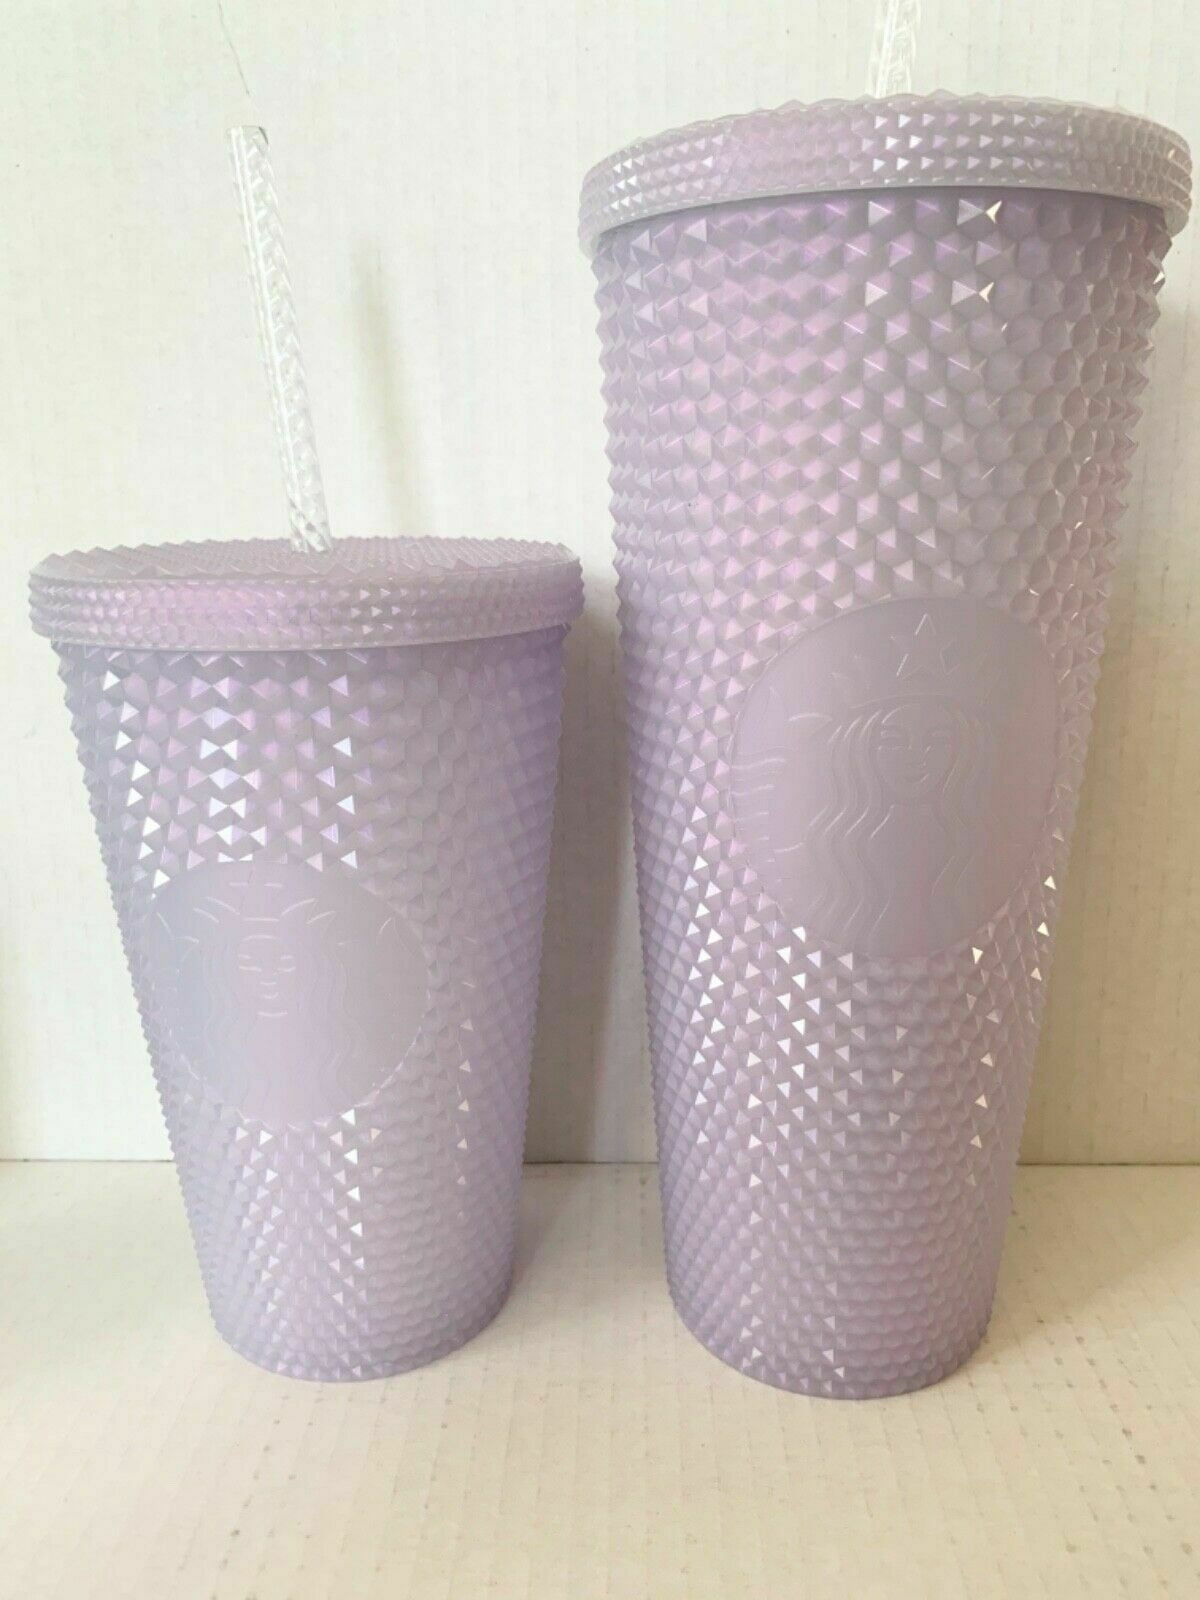 New Starbucks Holiday Icy lilac Bling Studded Cup tumbler 16oz Grande Christmas 